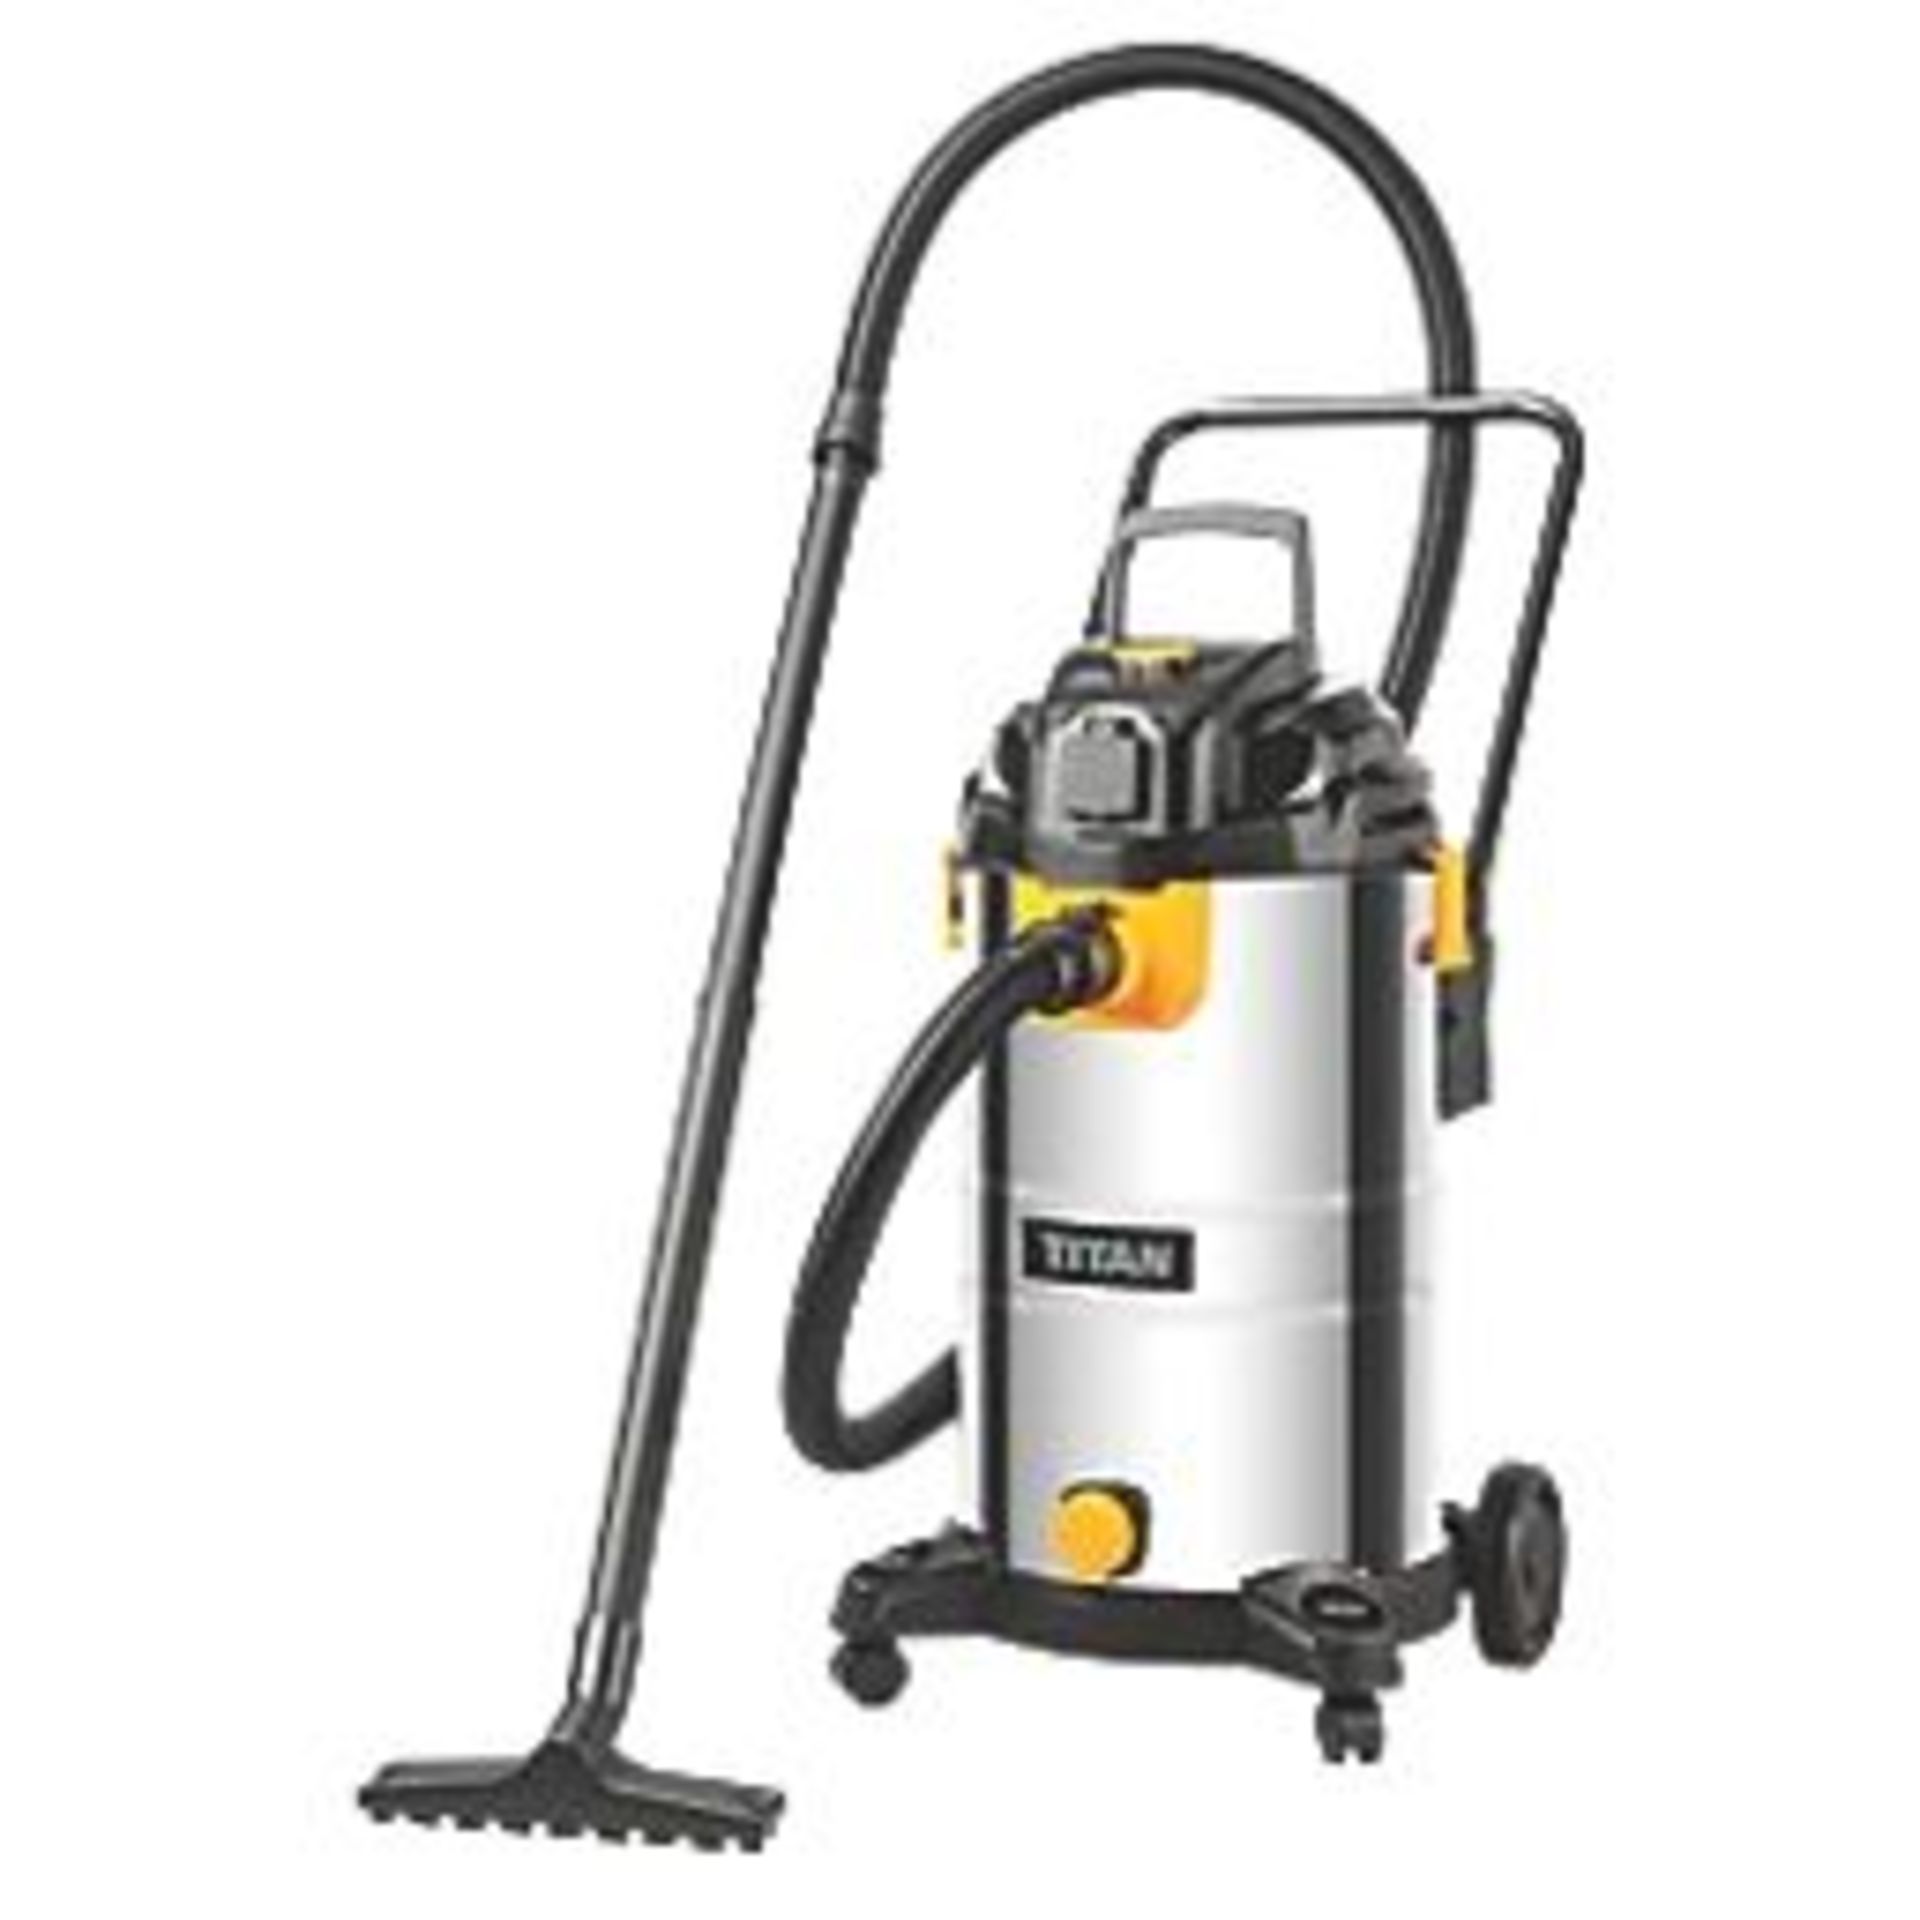 TITAN TTB777VAC 1500W 40LTR WET & DRY VACUUM 220-240V. - P4. Robust vacuum cleaner for wet and dry